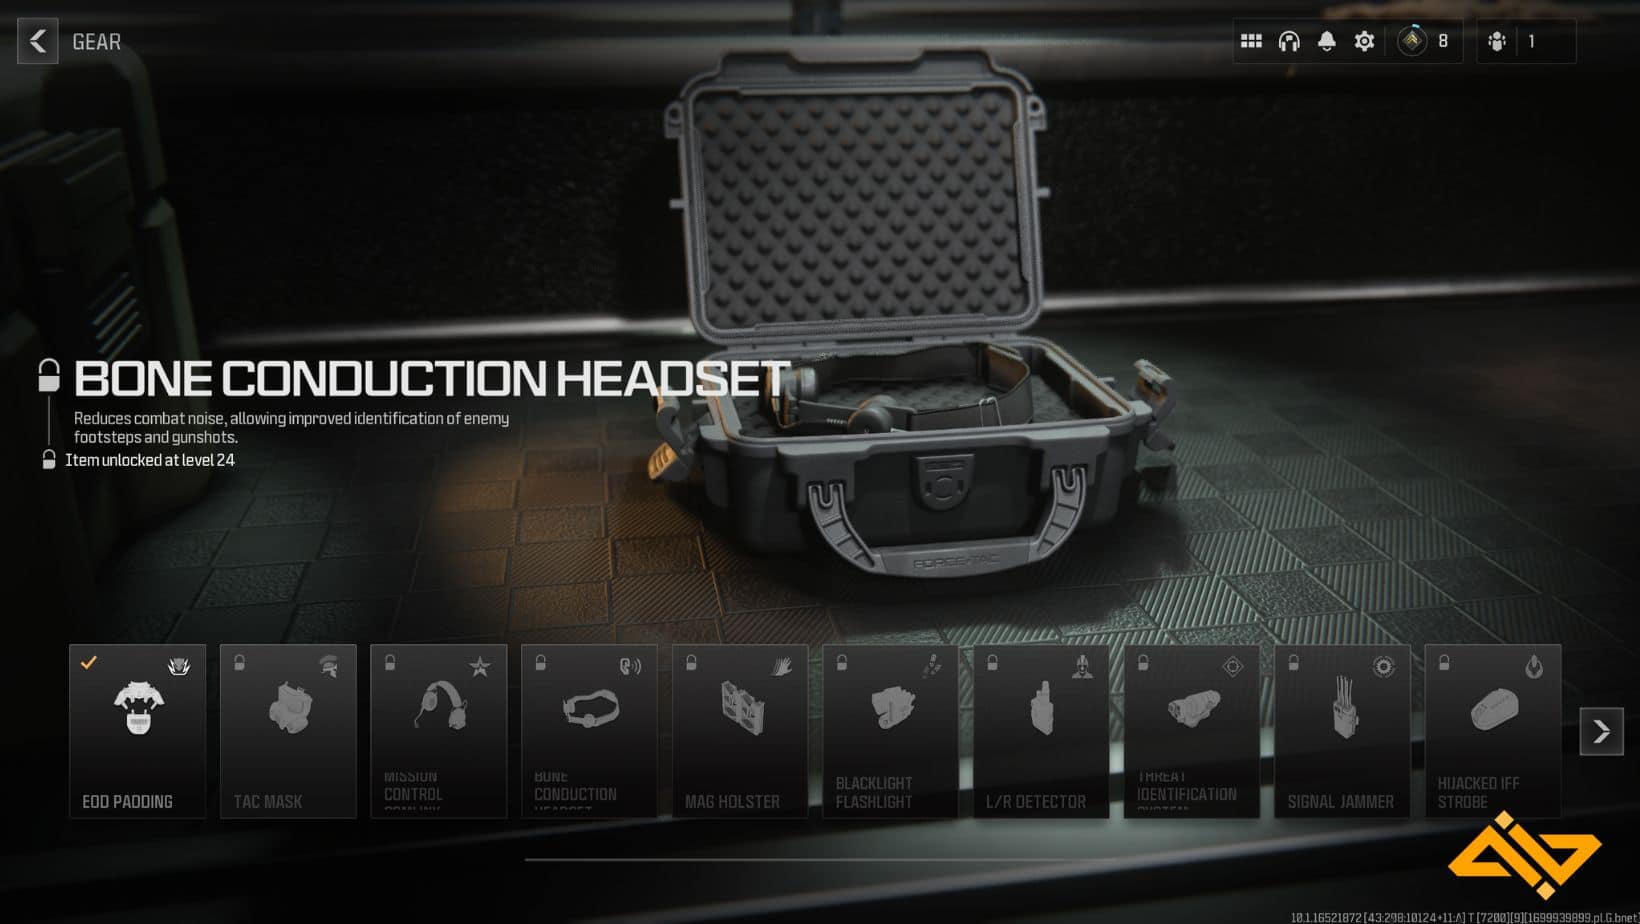 The Bone Conduction Headset allows players to hear enemy footsteps easily.